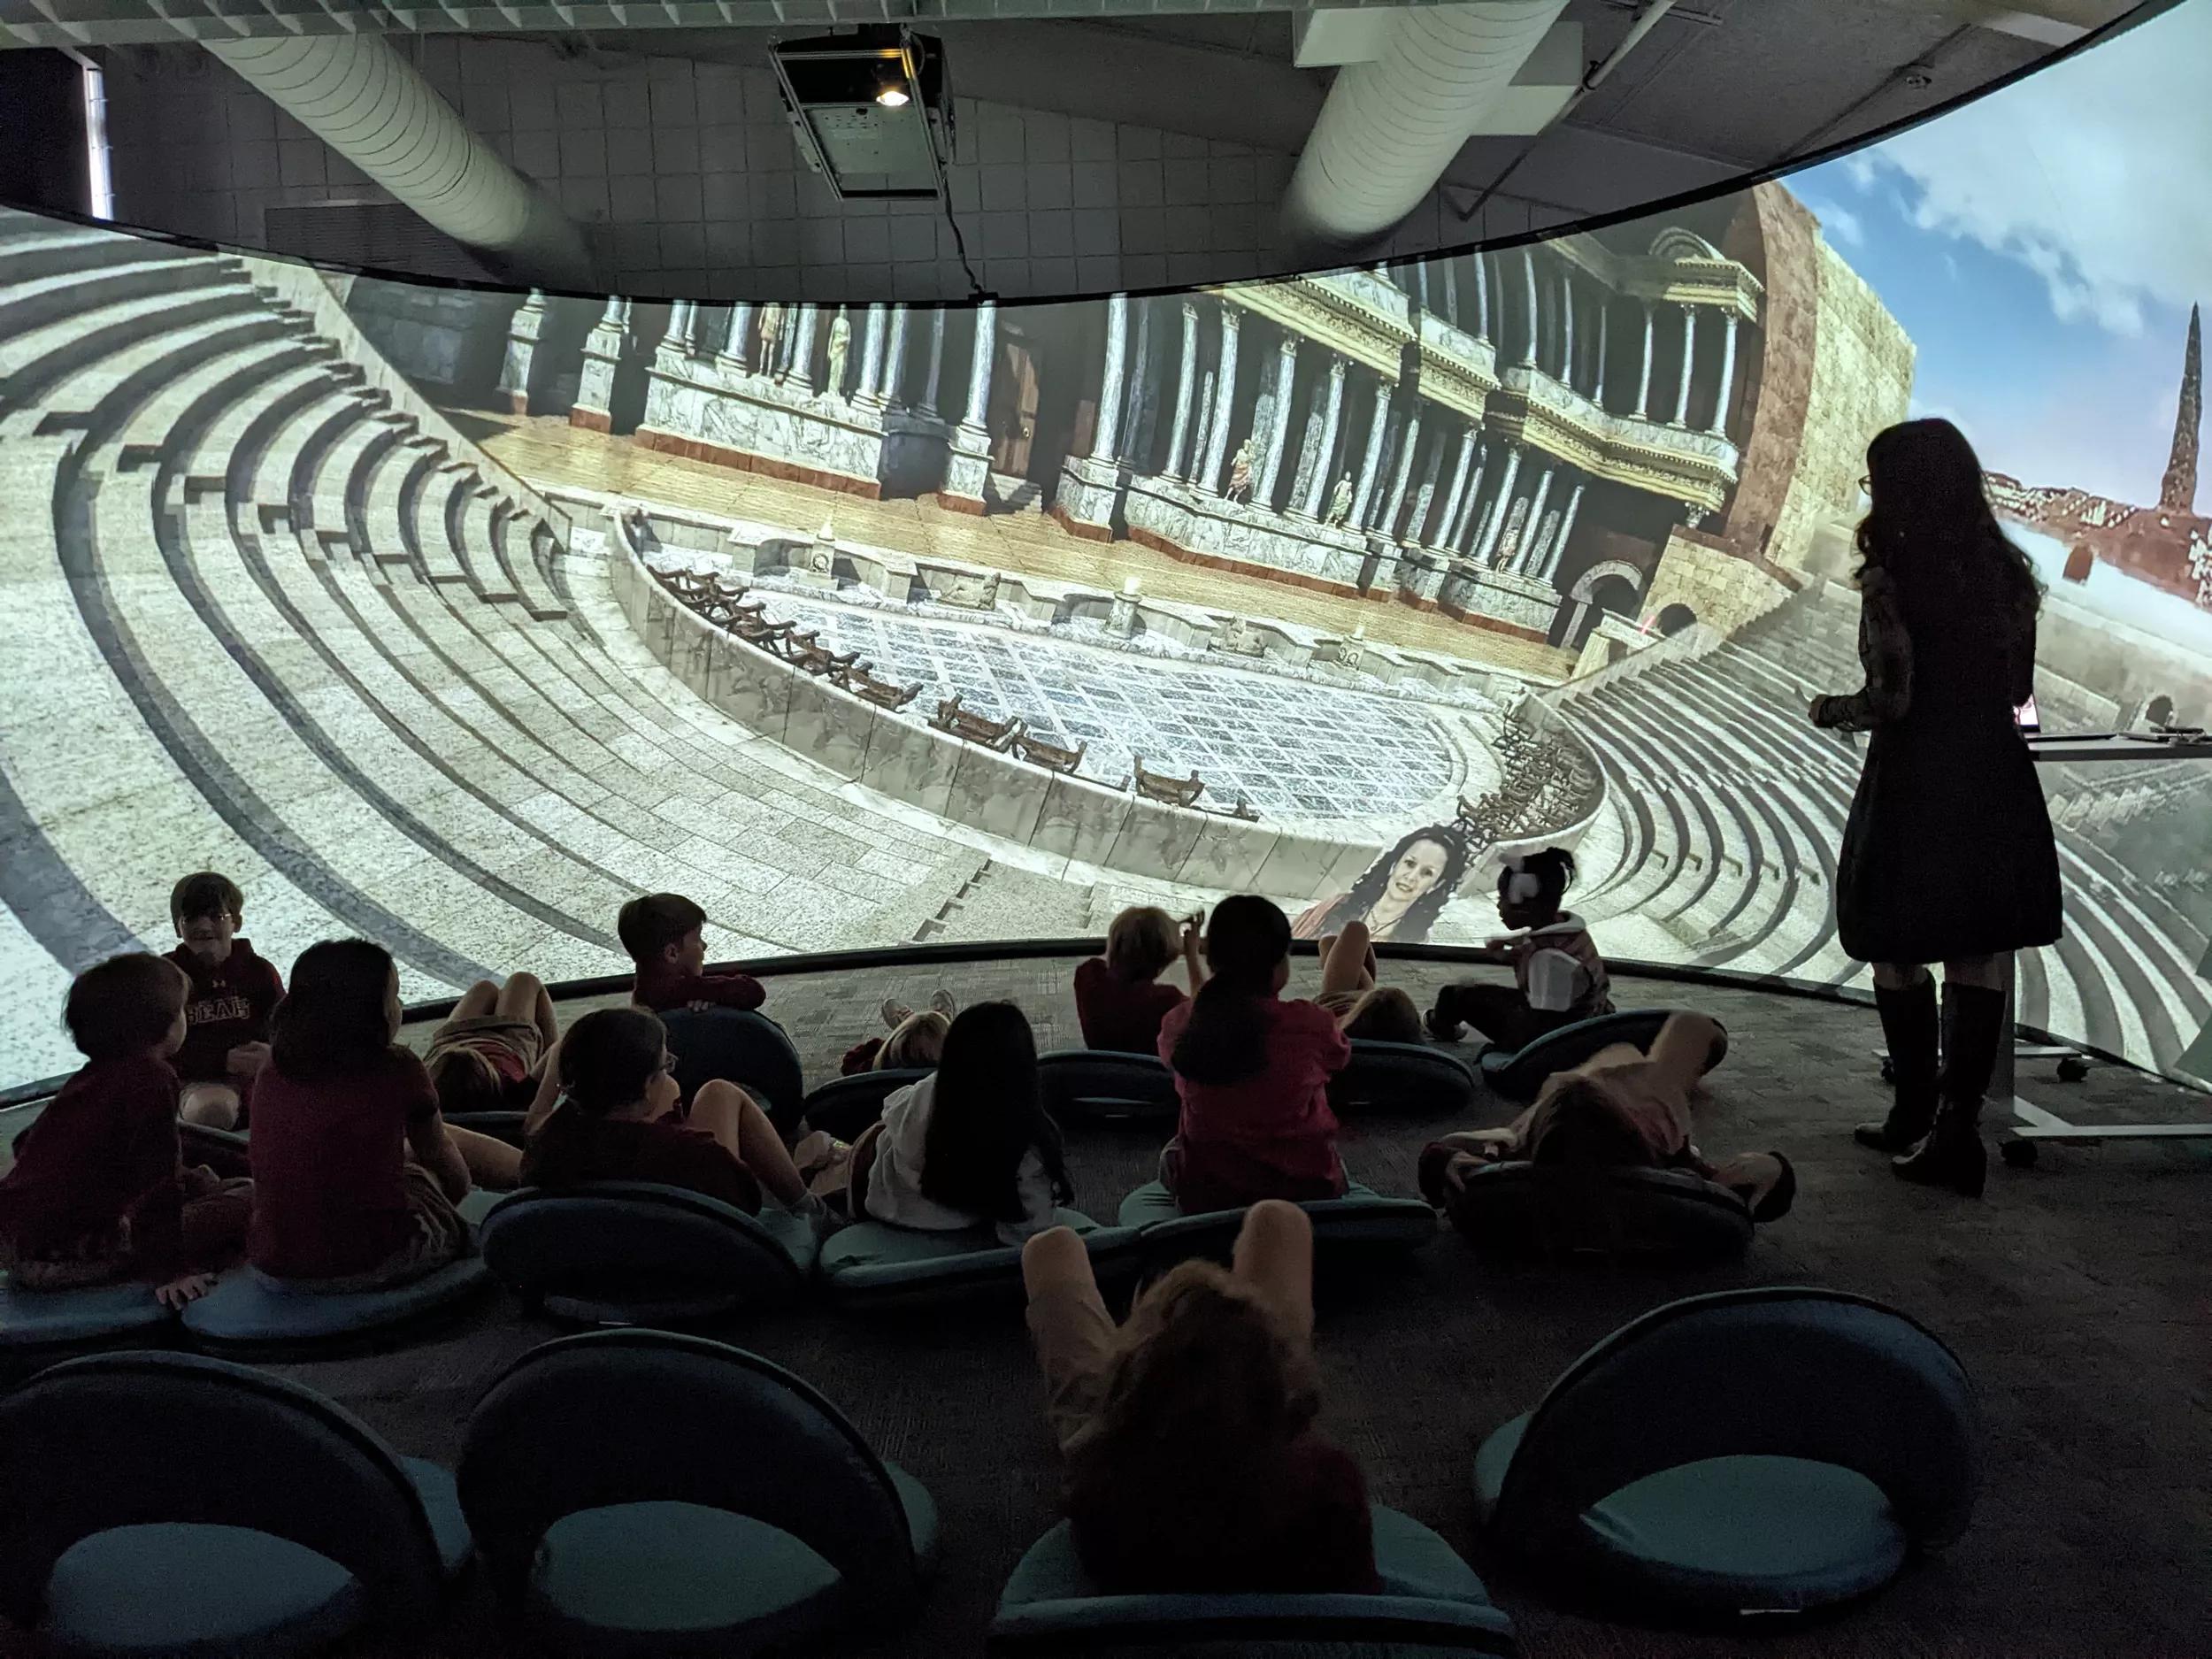 Immersive learning lab with 4K projections sparks creative